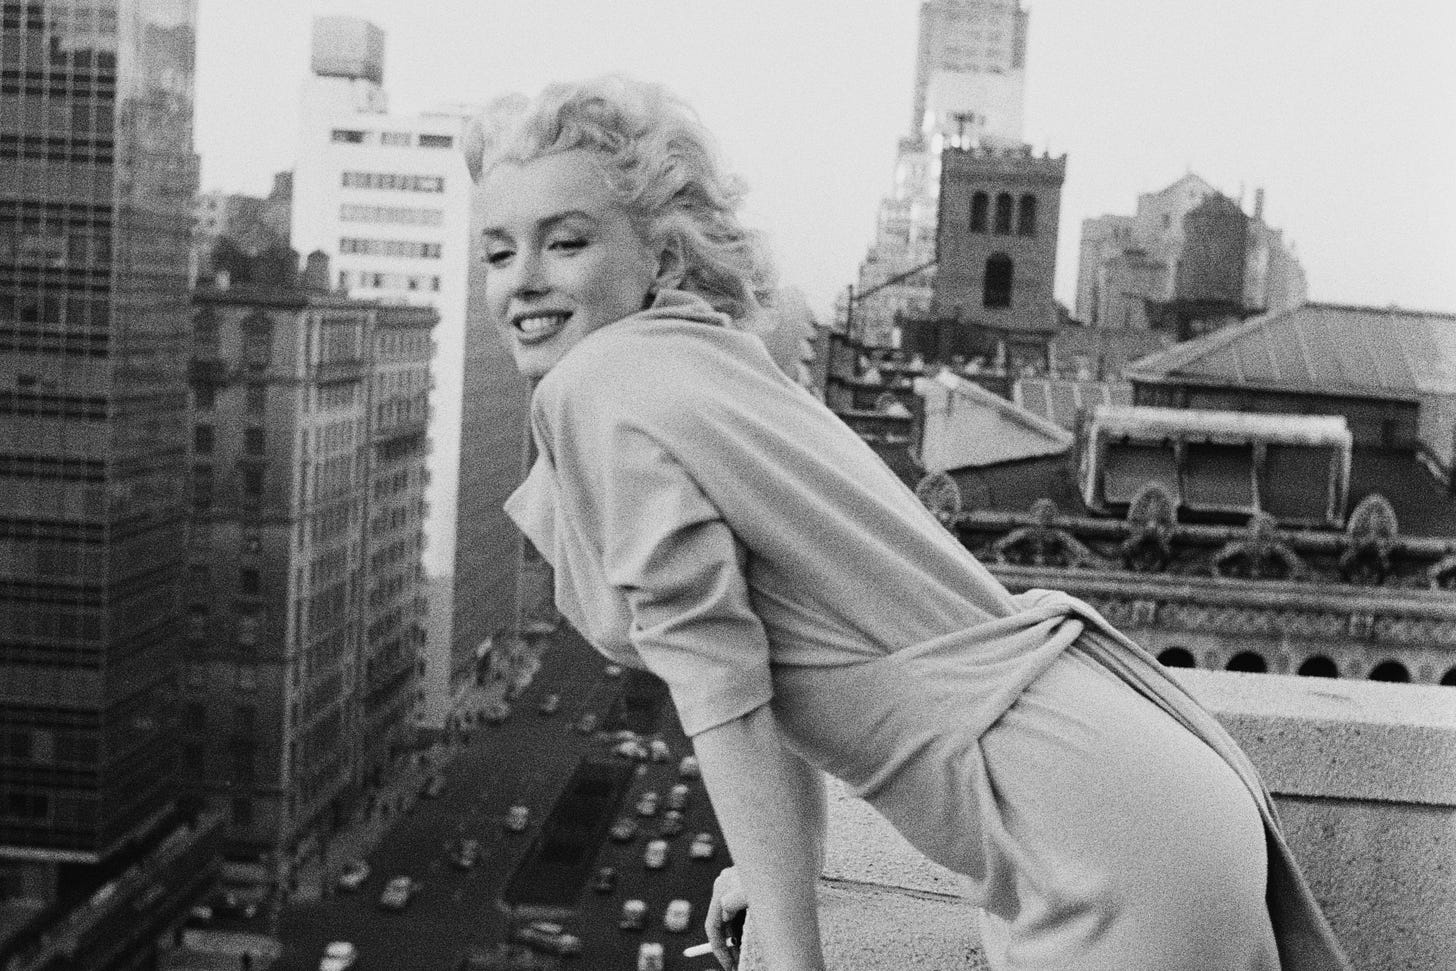 How NYC freed Marilyn Monroe from sexist Hollywood labels